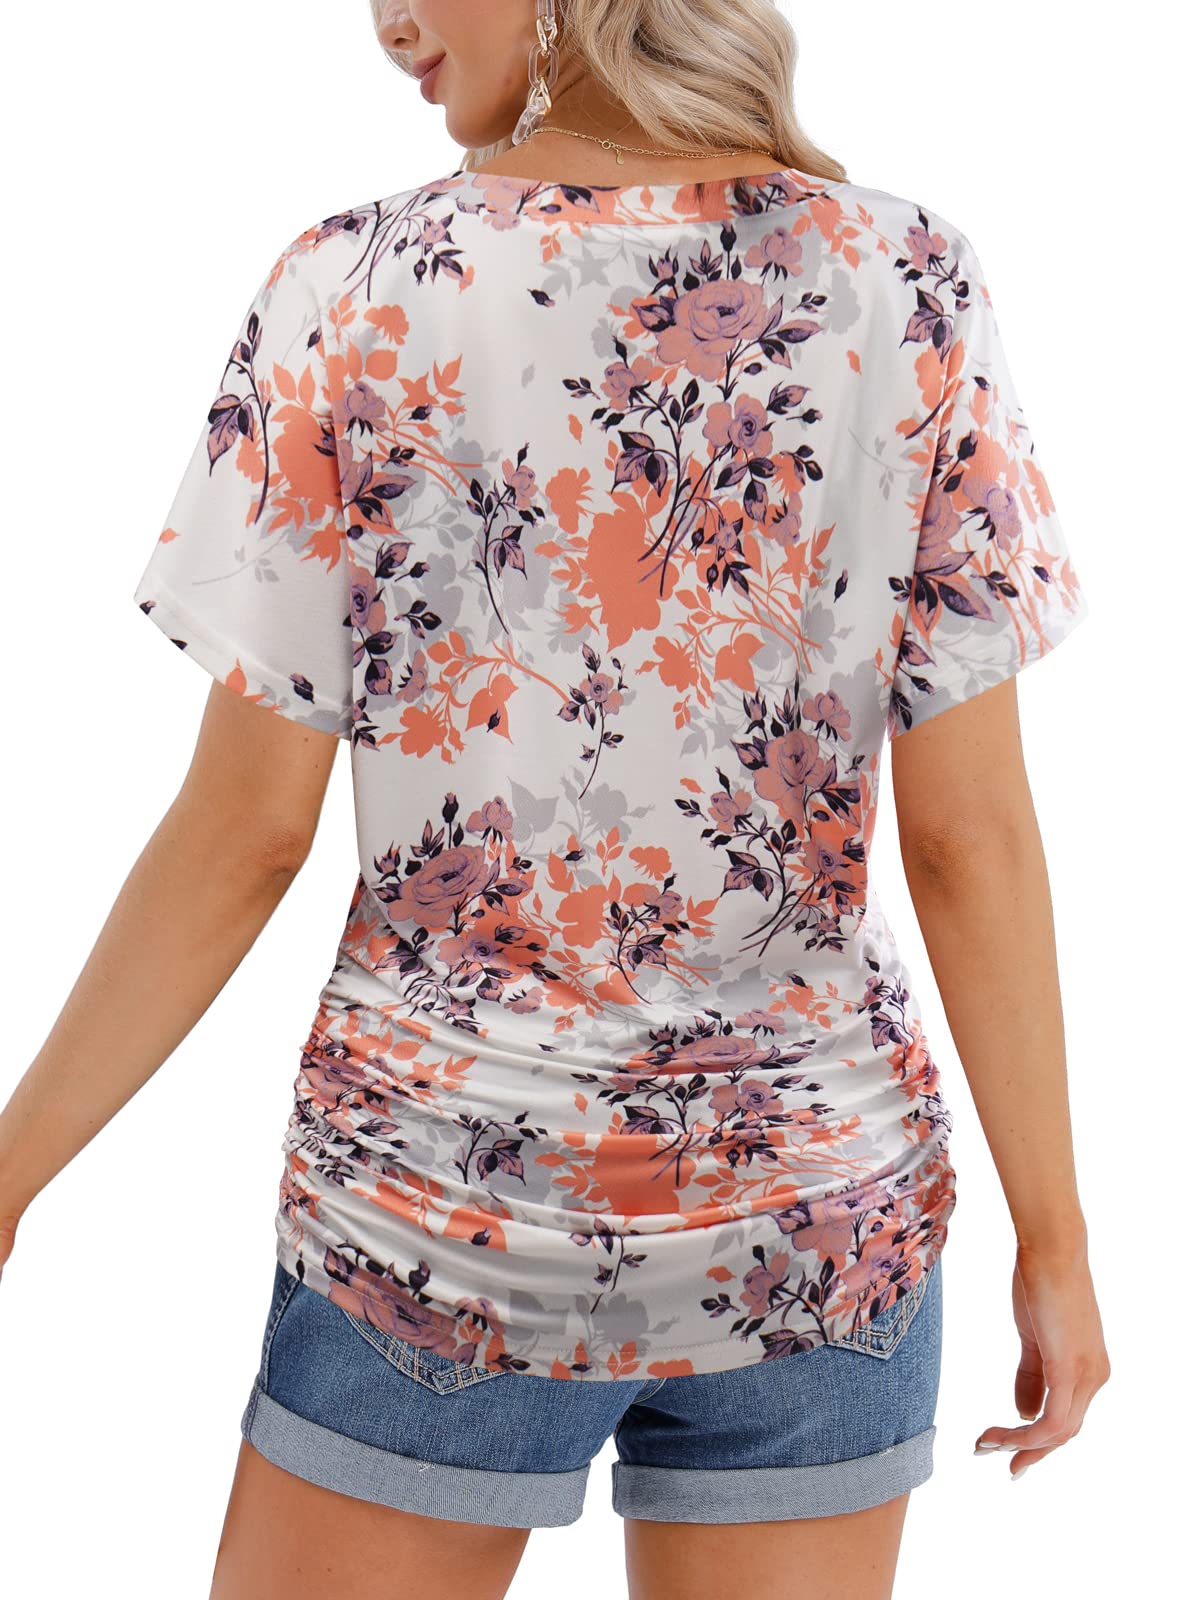 BAISHENGGT Orange Floral Women's Summer V Neck Short Sleeve T Shirts Floral Casual Dolman Tunic Tops with Side Shirring